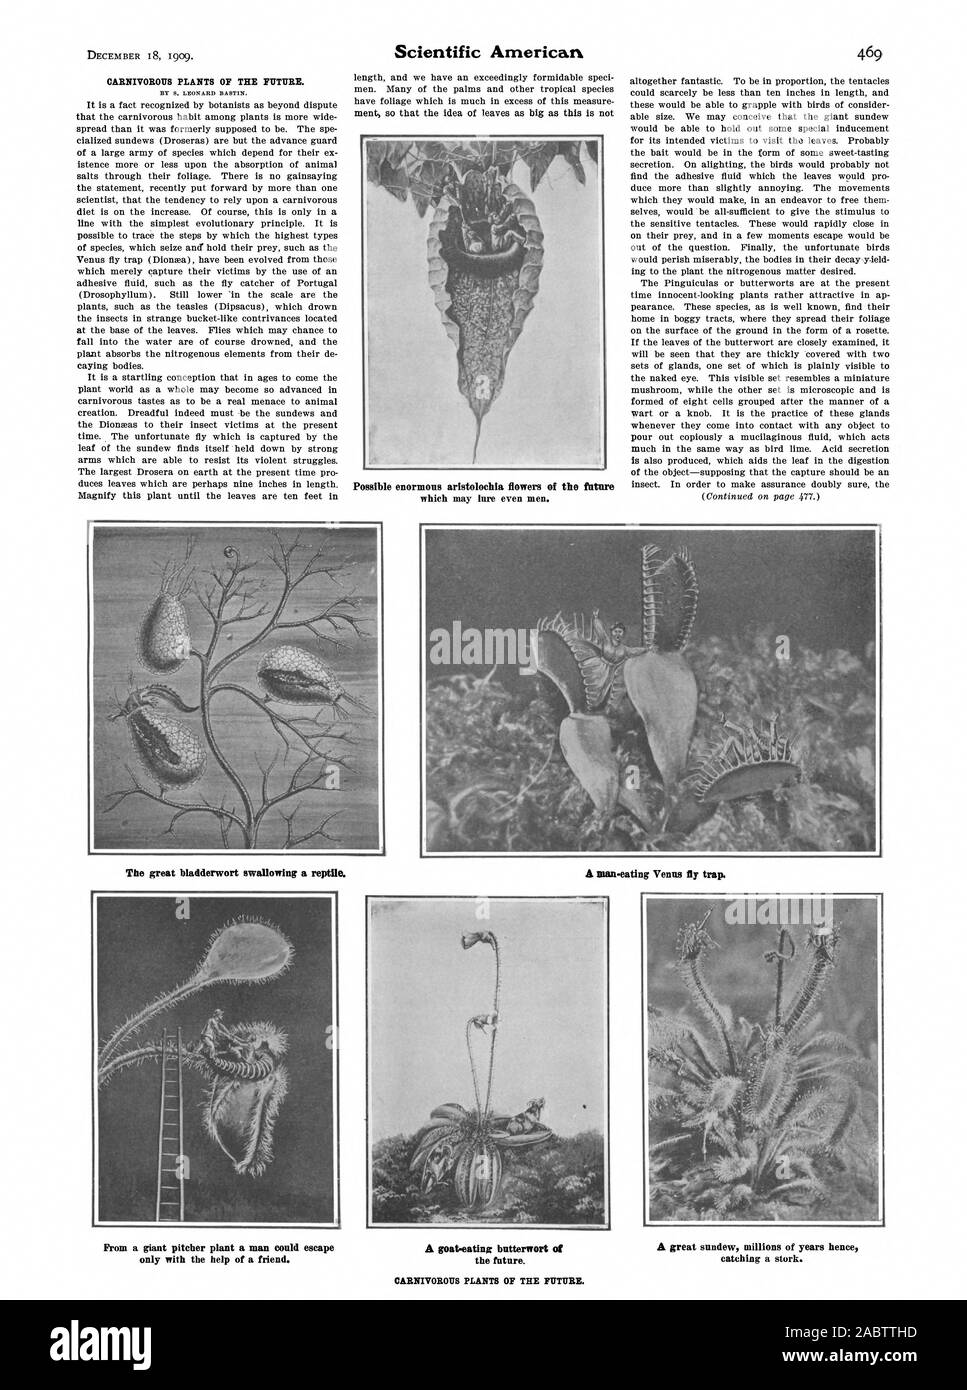 CARNIVOROUS PLANTS OF THE FUTURE. Possible enormous aristolochia flowers of the future which may lure even men. The great bladderwort swallowing a reptile. CARNIVOROUS PLANTS OF THE FUTURE., scientific american, -1909-12-18 Stock Photo